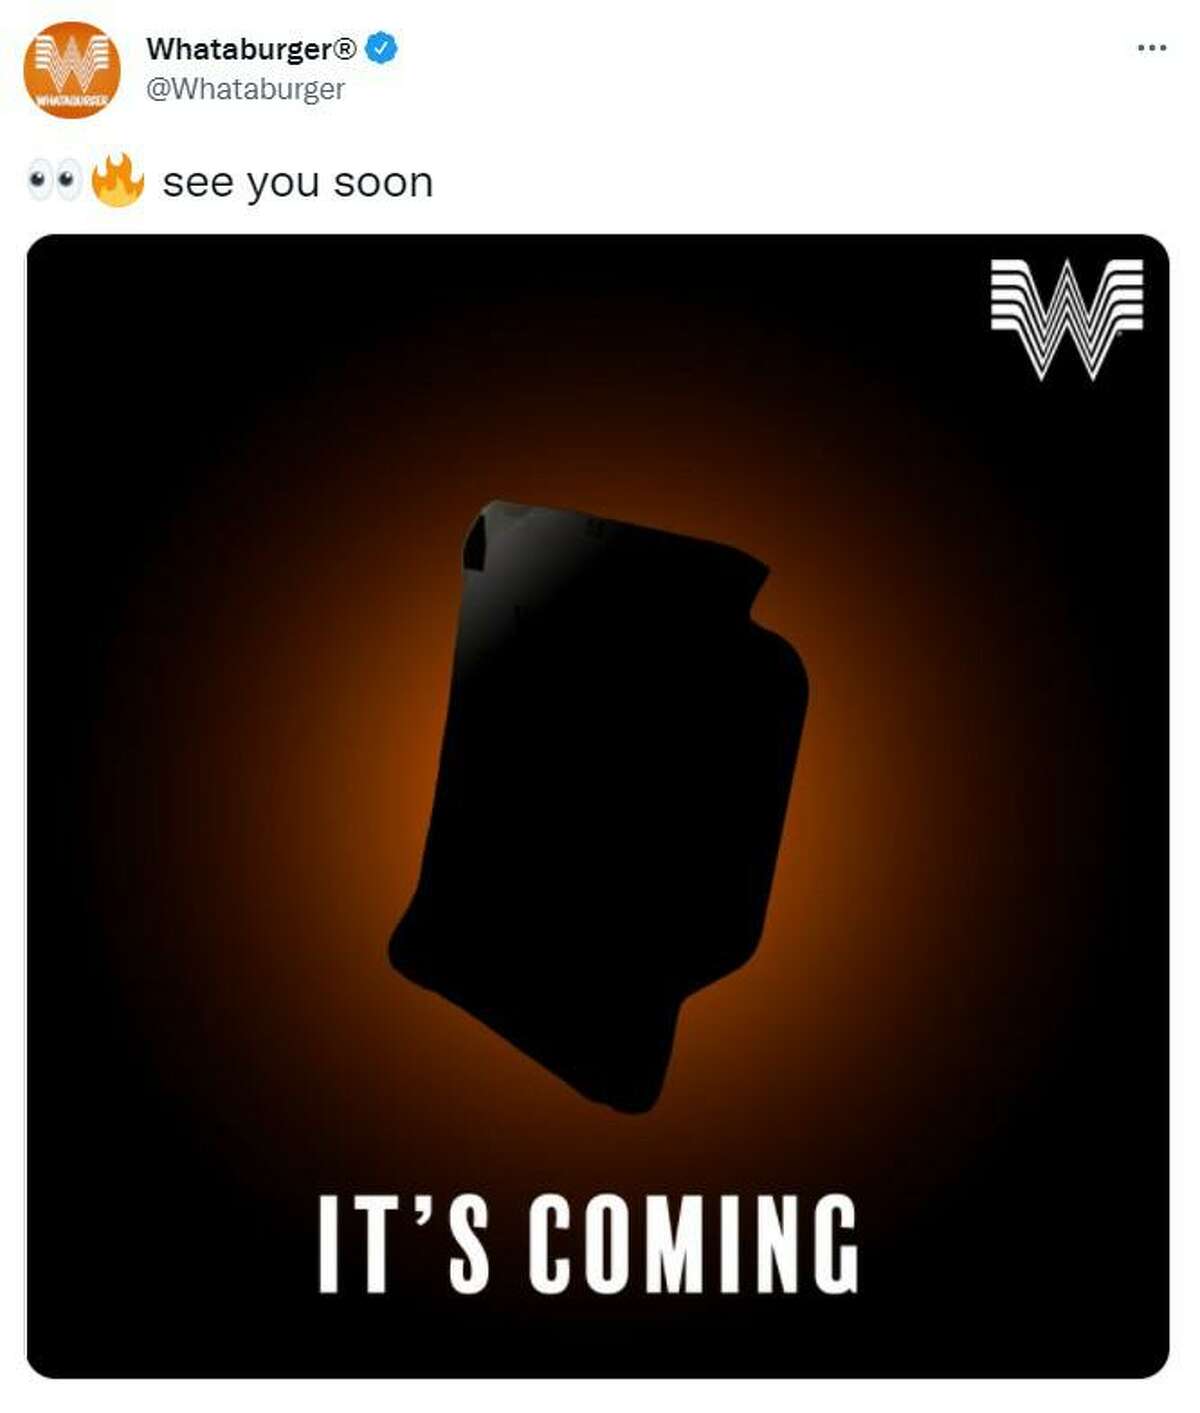 Whataburger posted a cryptic photo on social media, saying something new is coming soon.